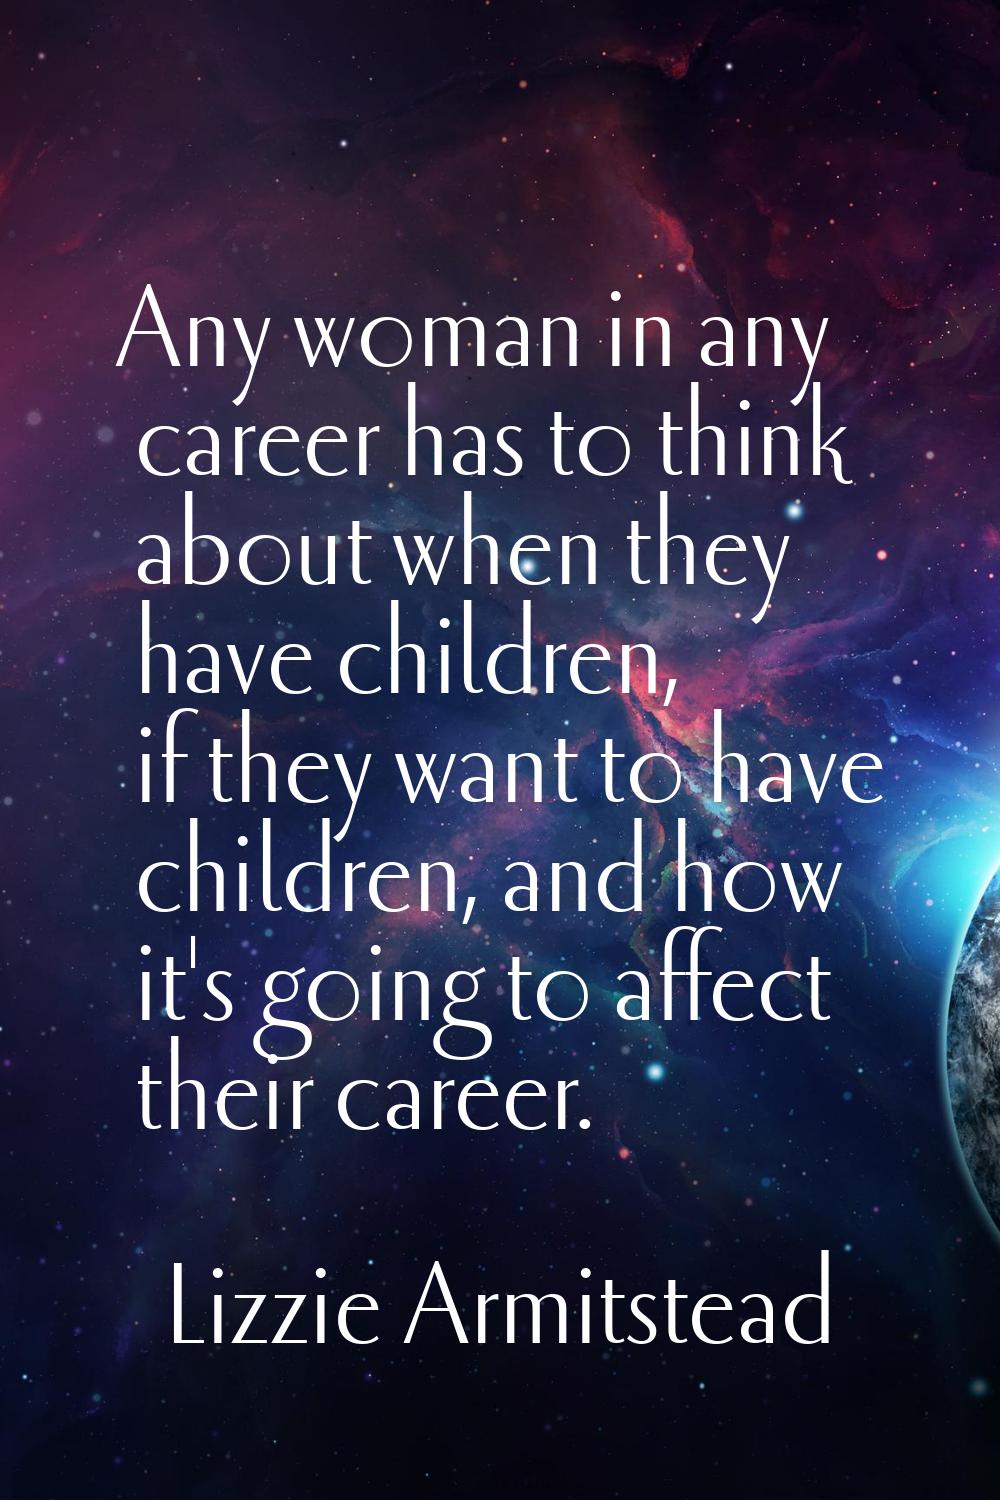 Any woman in any career has to think about when they have children, if they want to have children, 